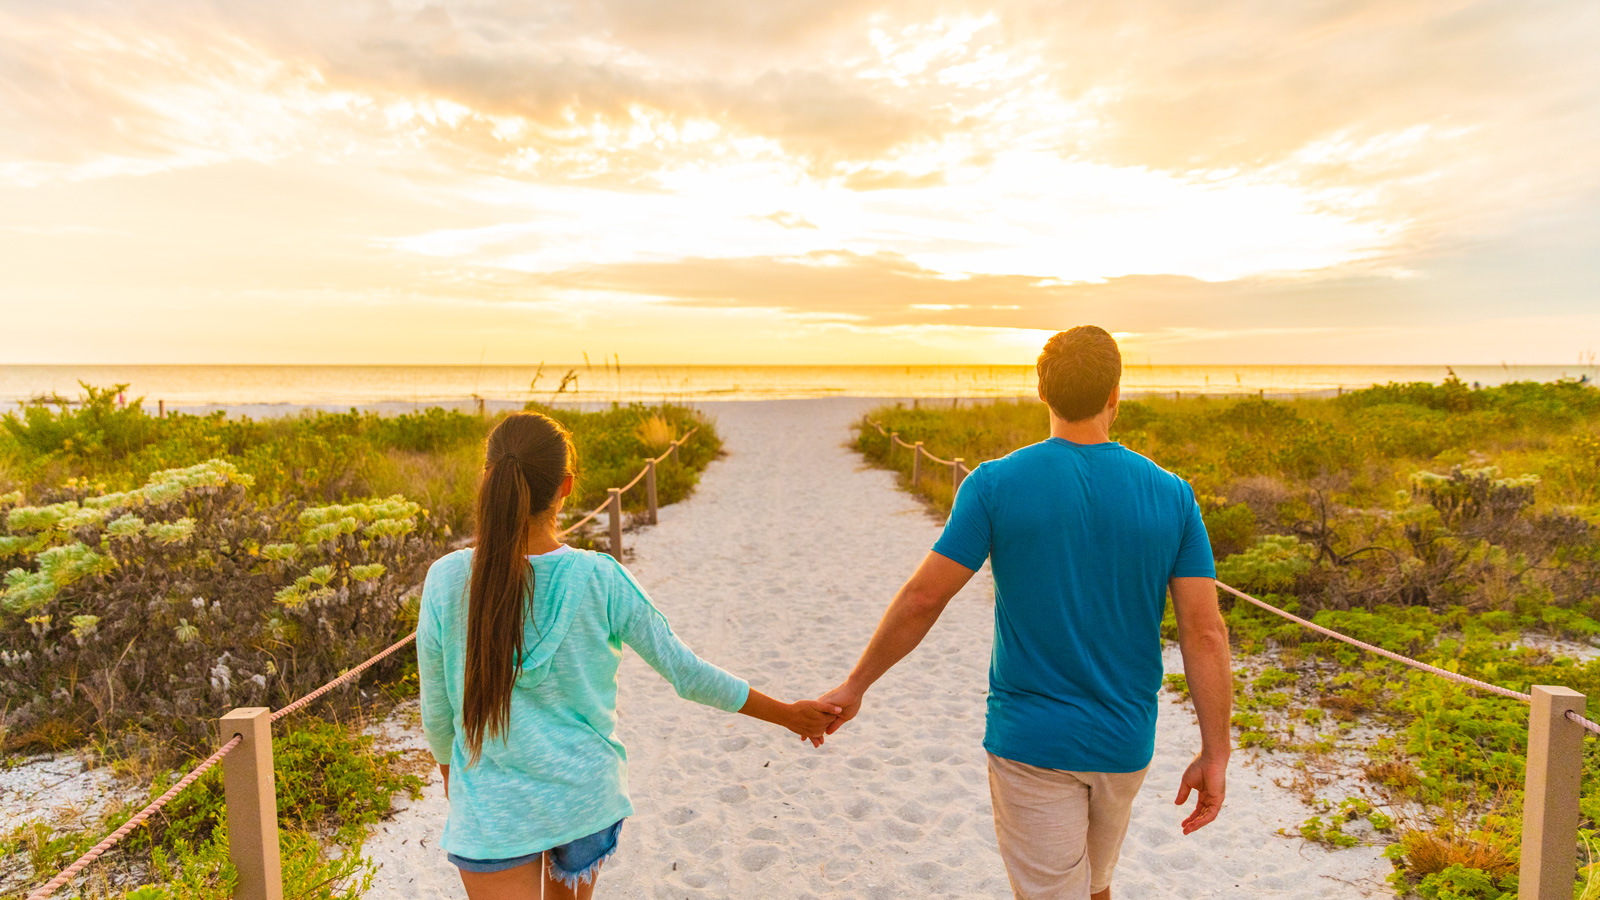 Happy young couple in love walking on romantic evening beach stroll at sunset. Lovers holding hands on summer holidays in Florida beach vacation destination. People walking from behind 1600x900